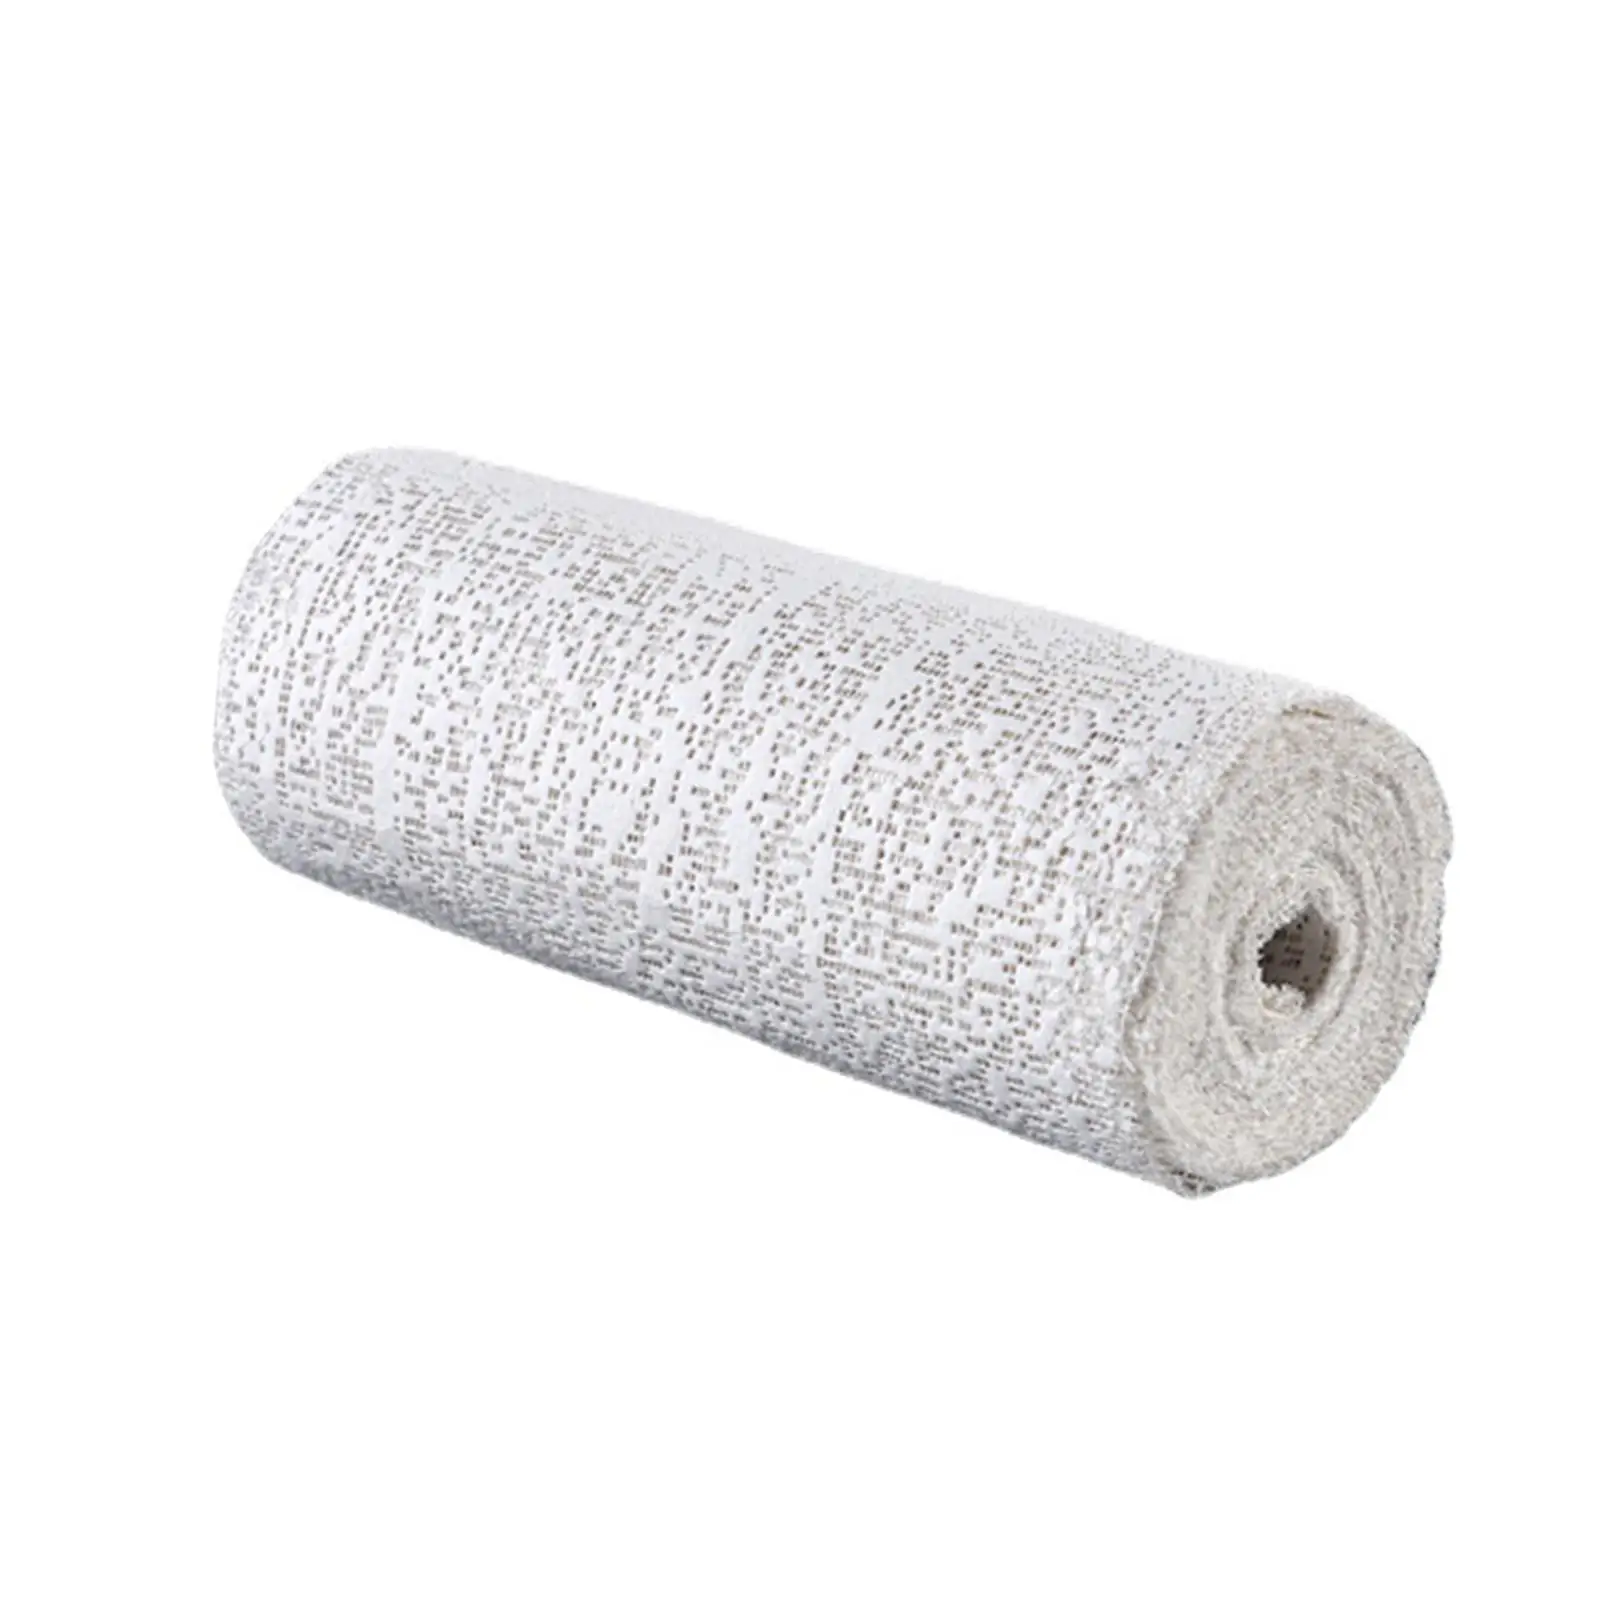 Plaster Cloth Gauze Bandages Cast Material Wrap Tape for Belly Casting Sculpturing Model Trains Railway Layout Crafting